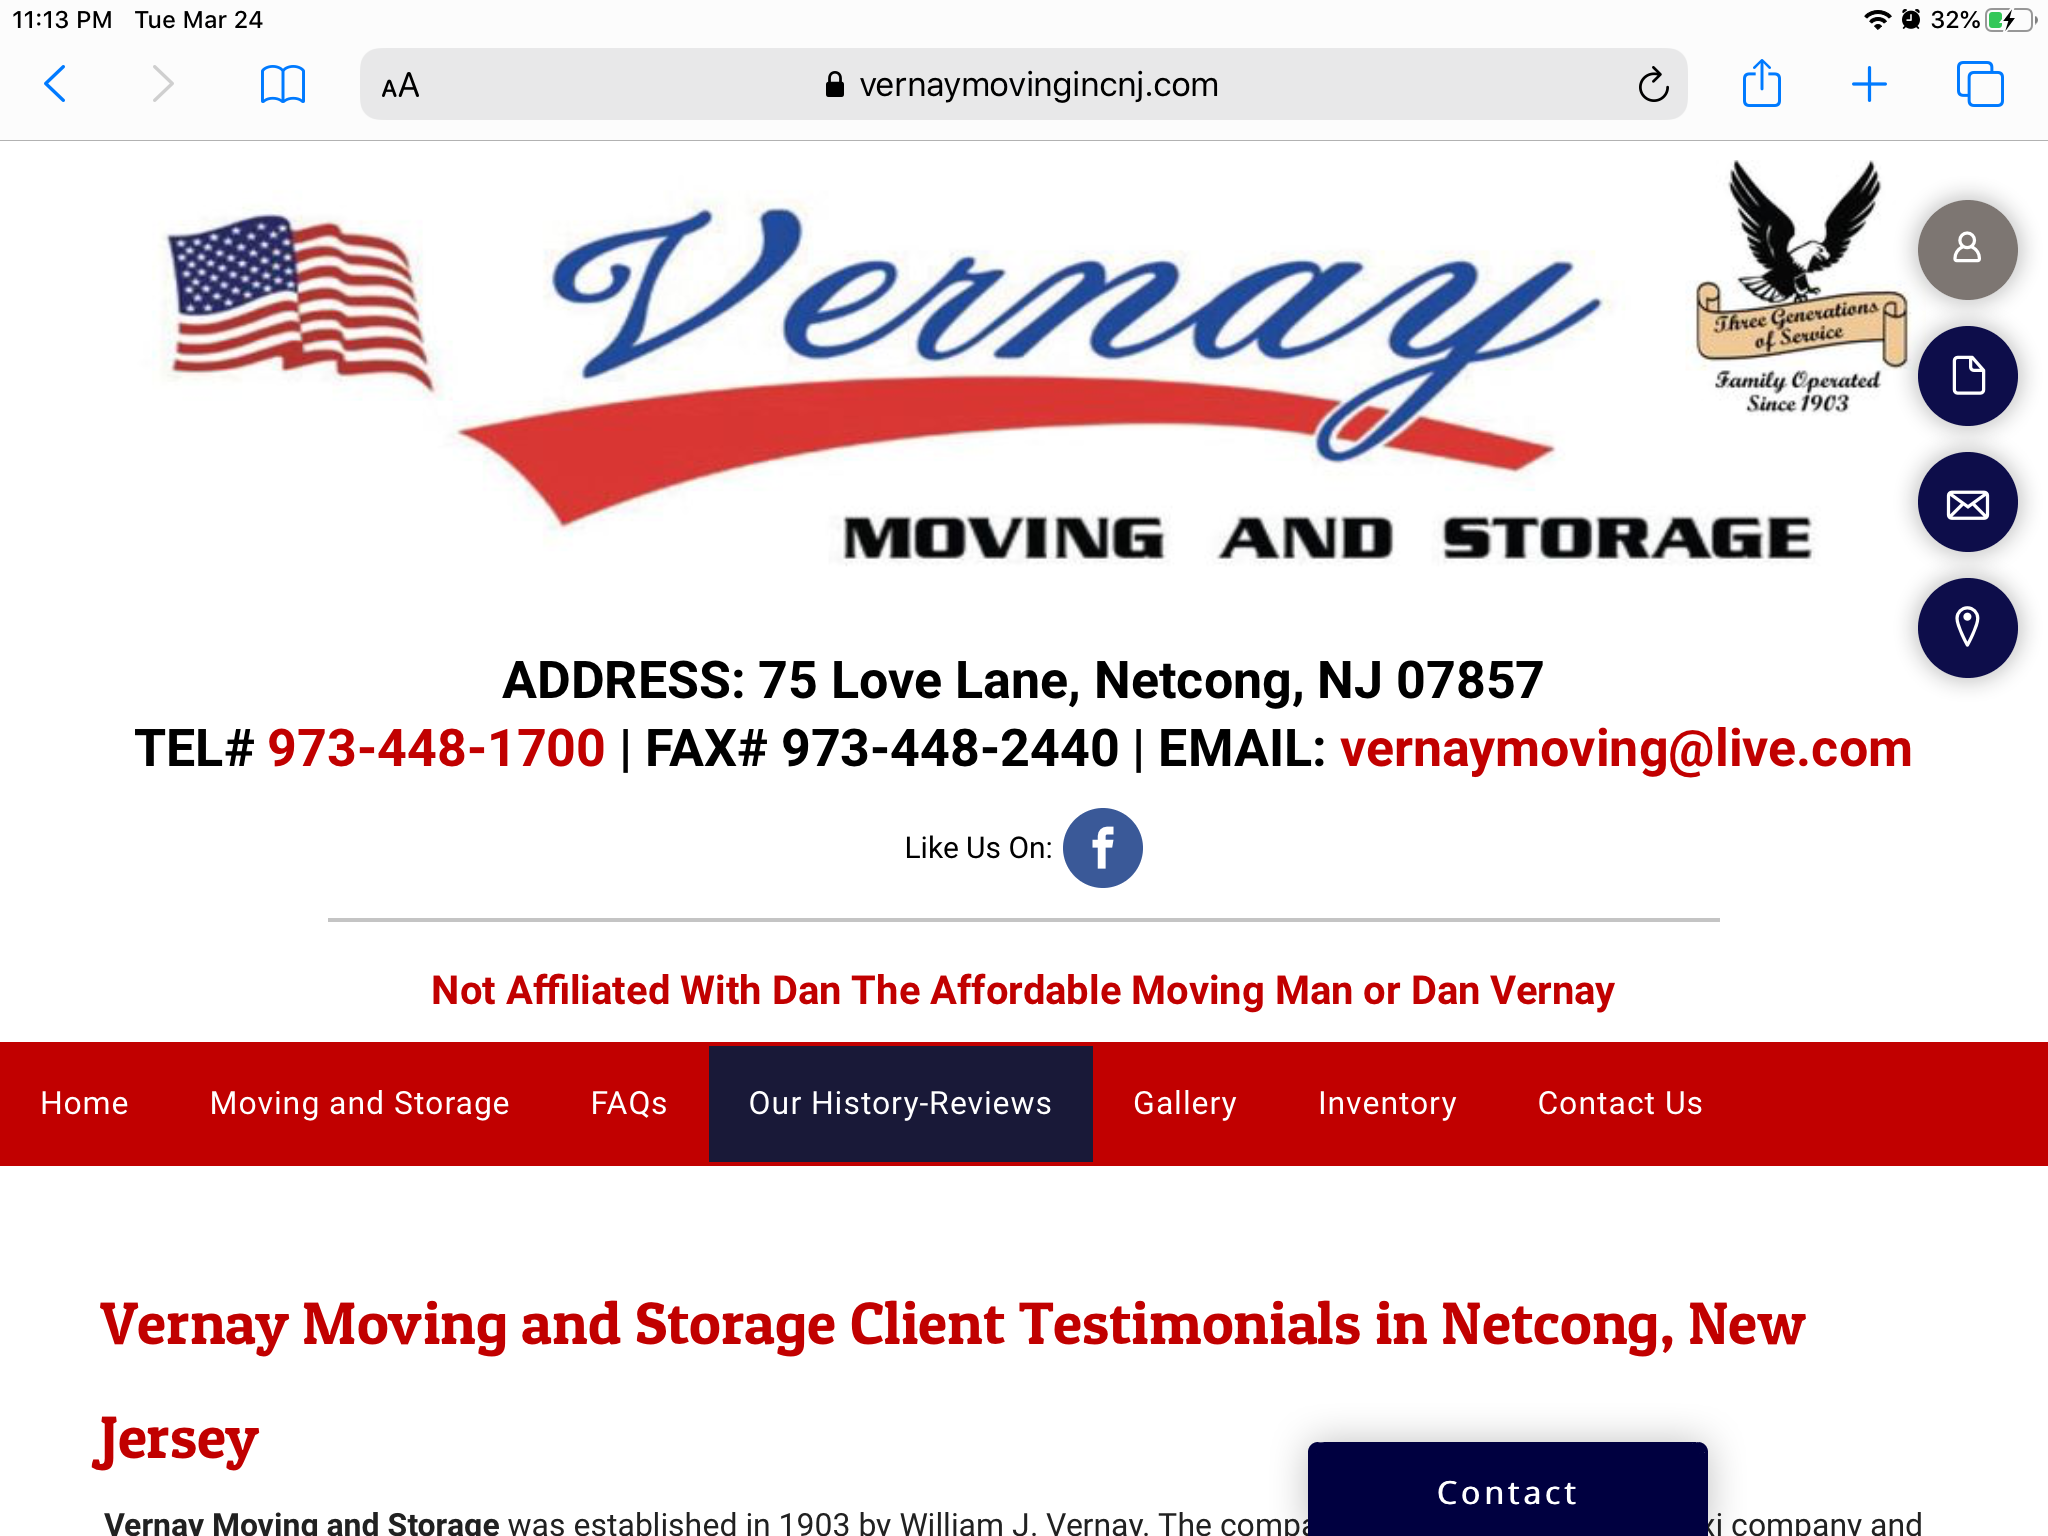 Vernay Moving And Storage